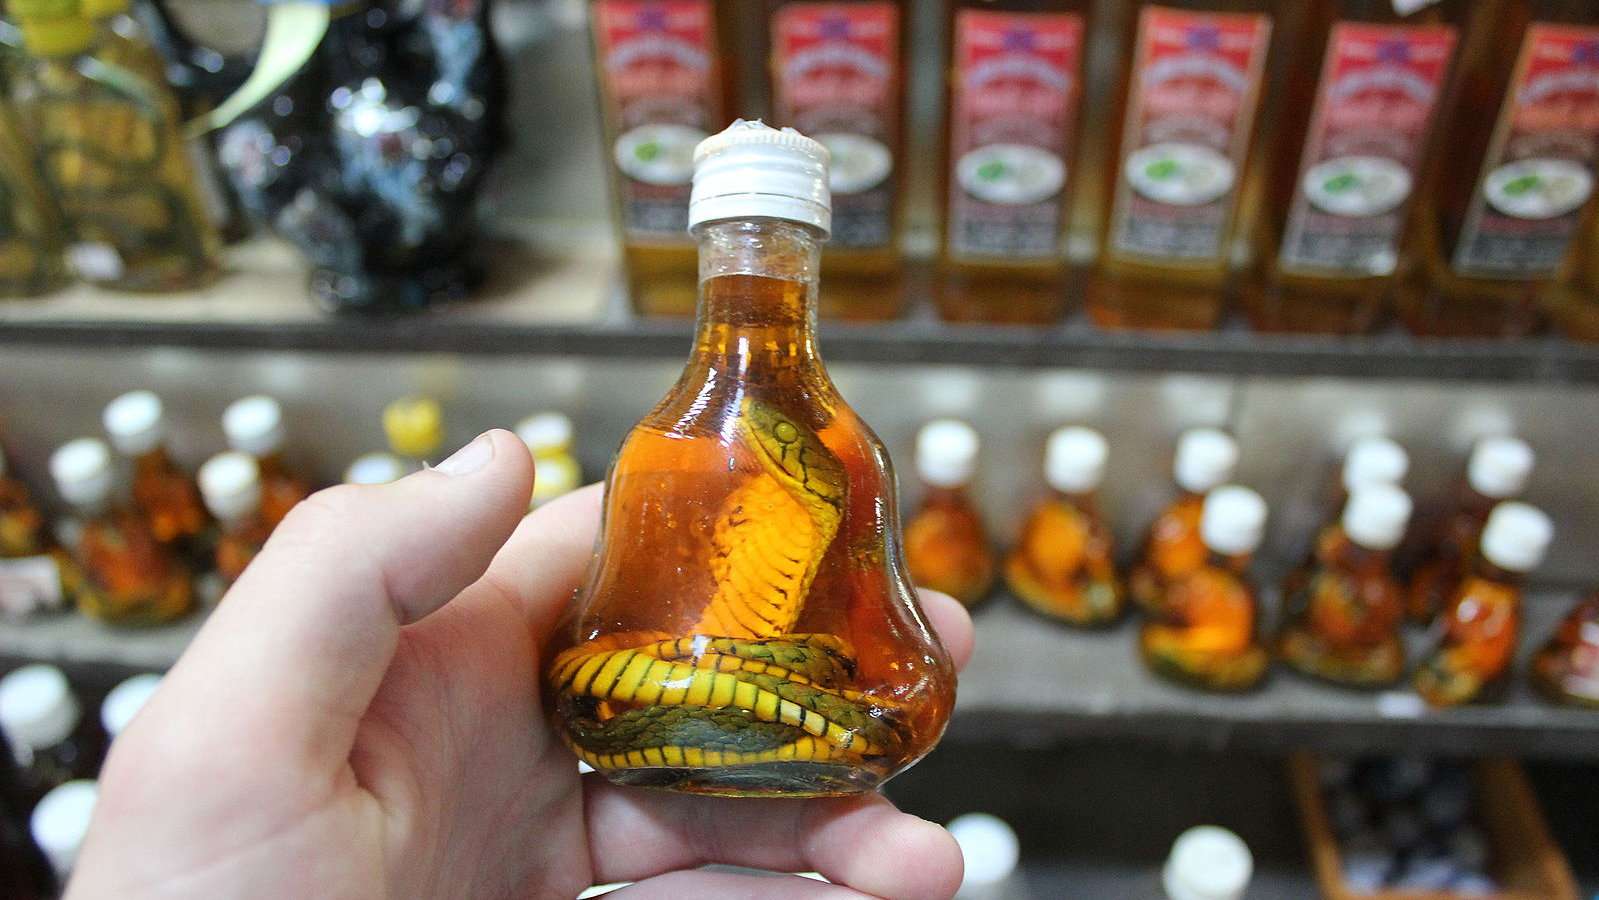 Wine made with snakes, or part of snakes, is thought to be very good for you in Vietnam